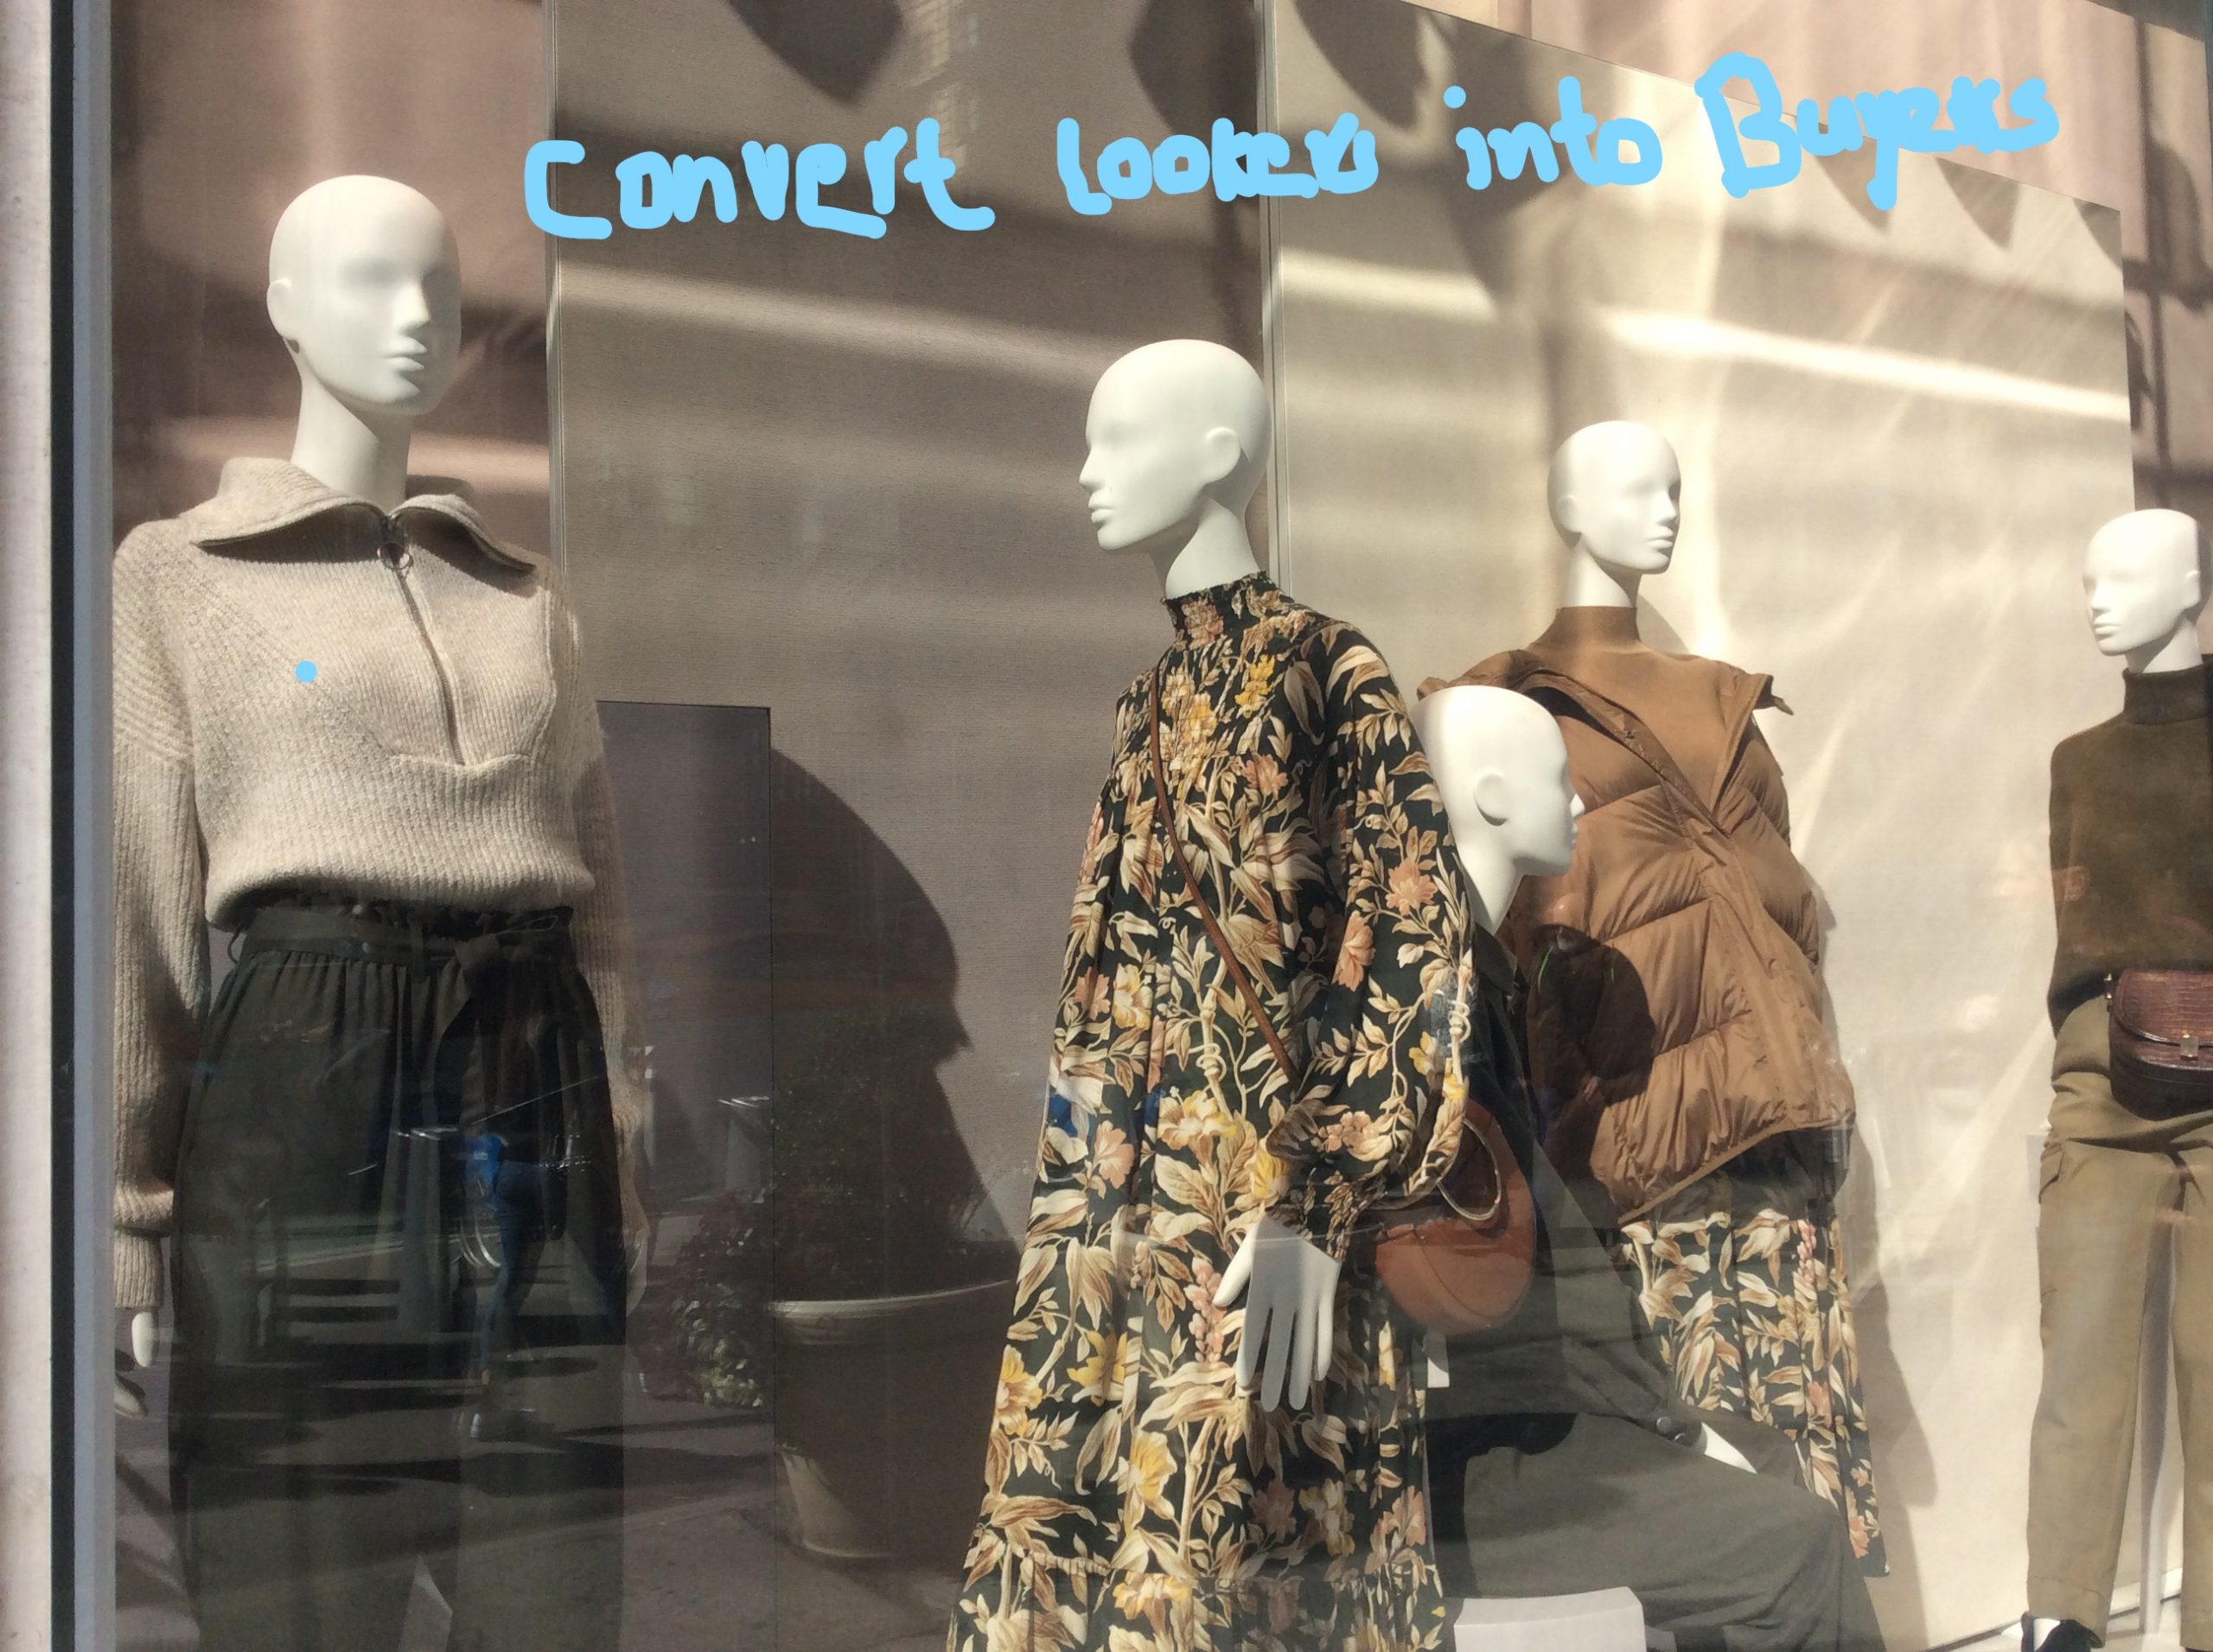 Display Mannequins Will Convert lookers into Buyers